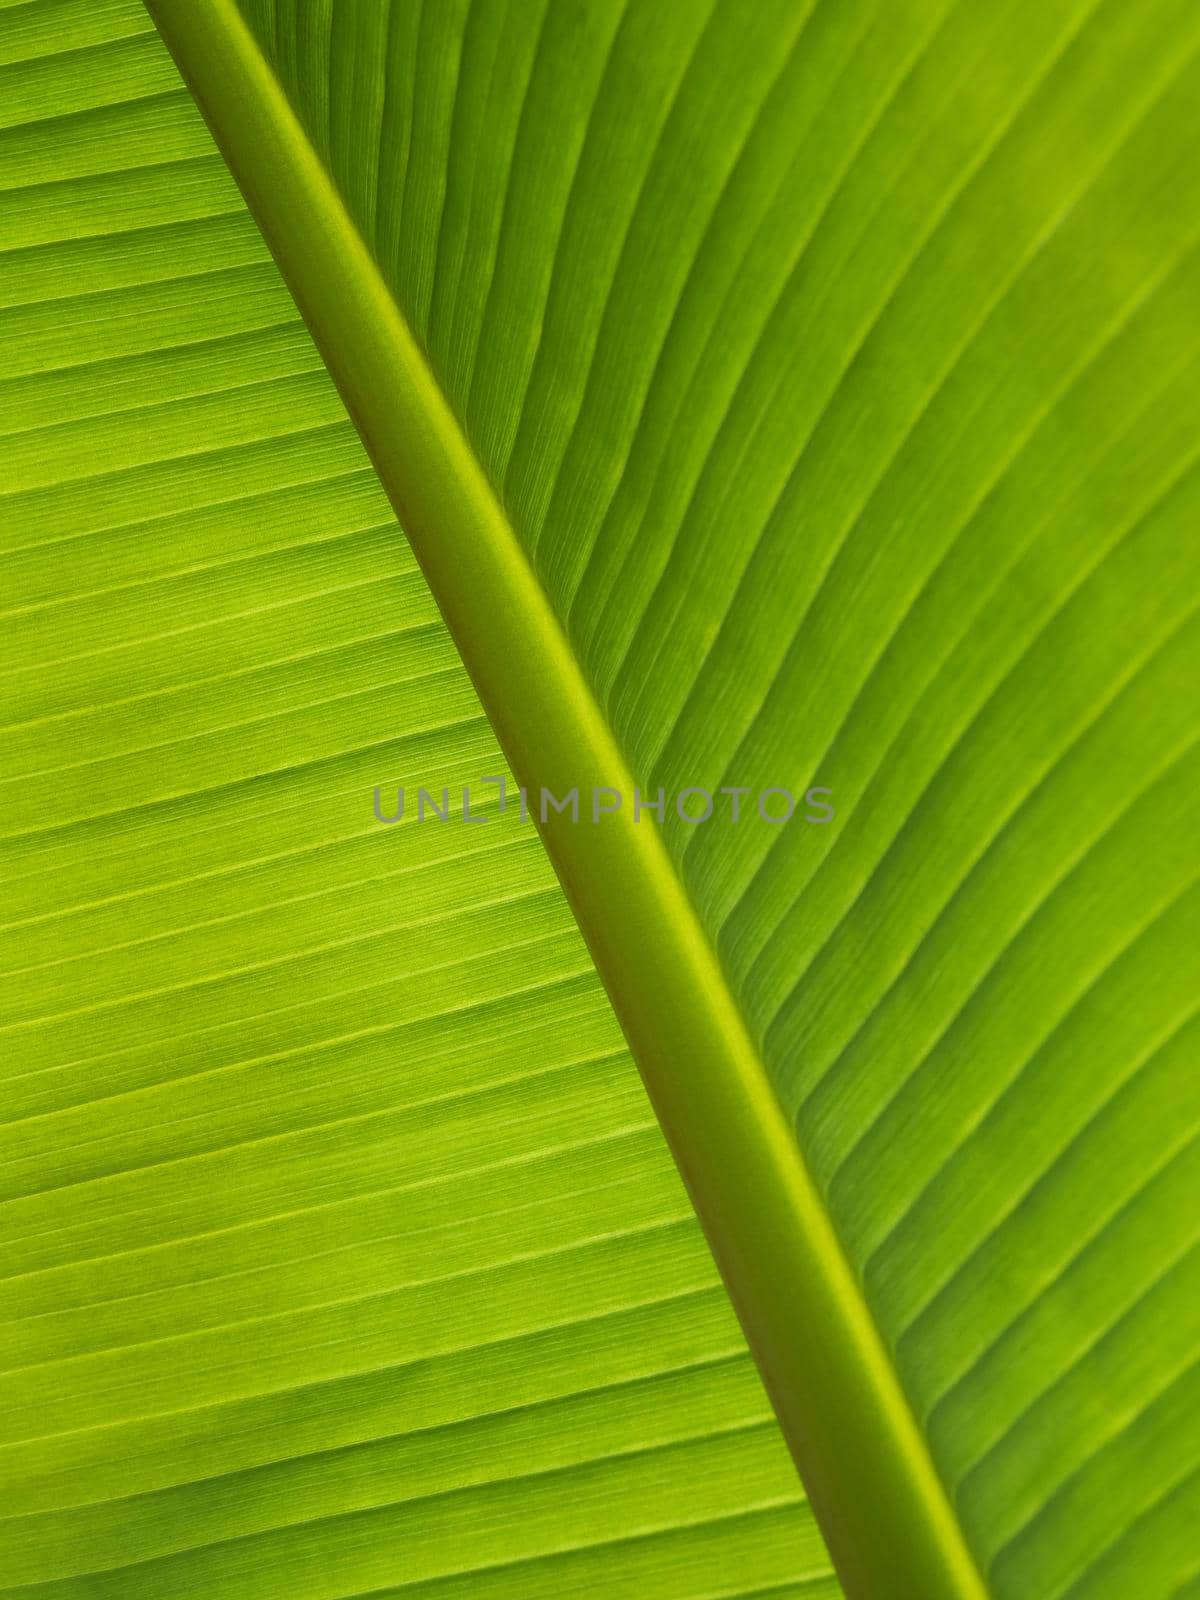 Texture of green leaf against the light. Abstract natural background.